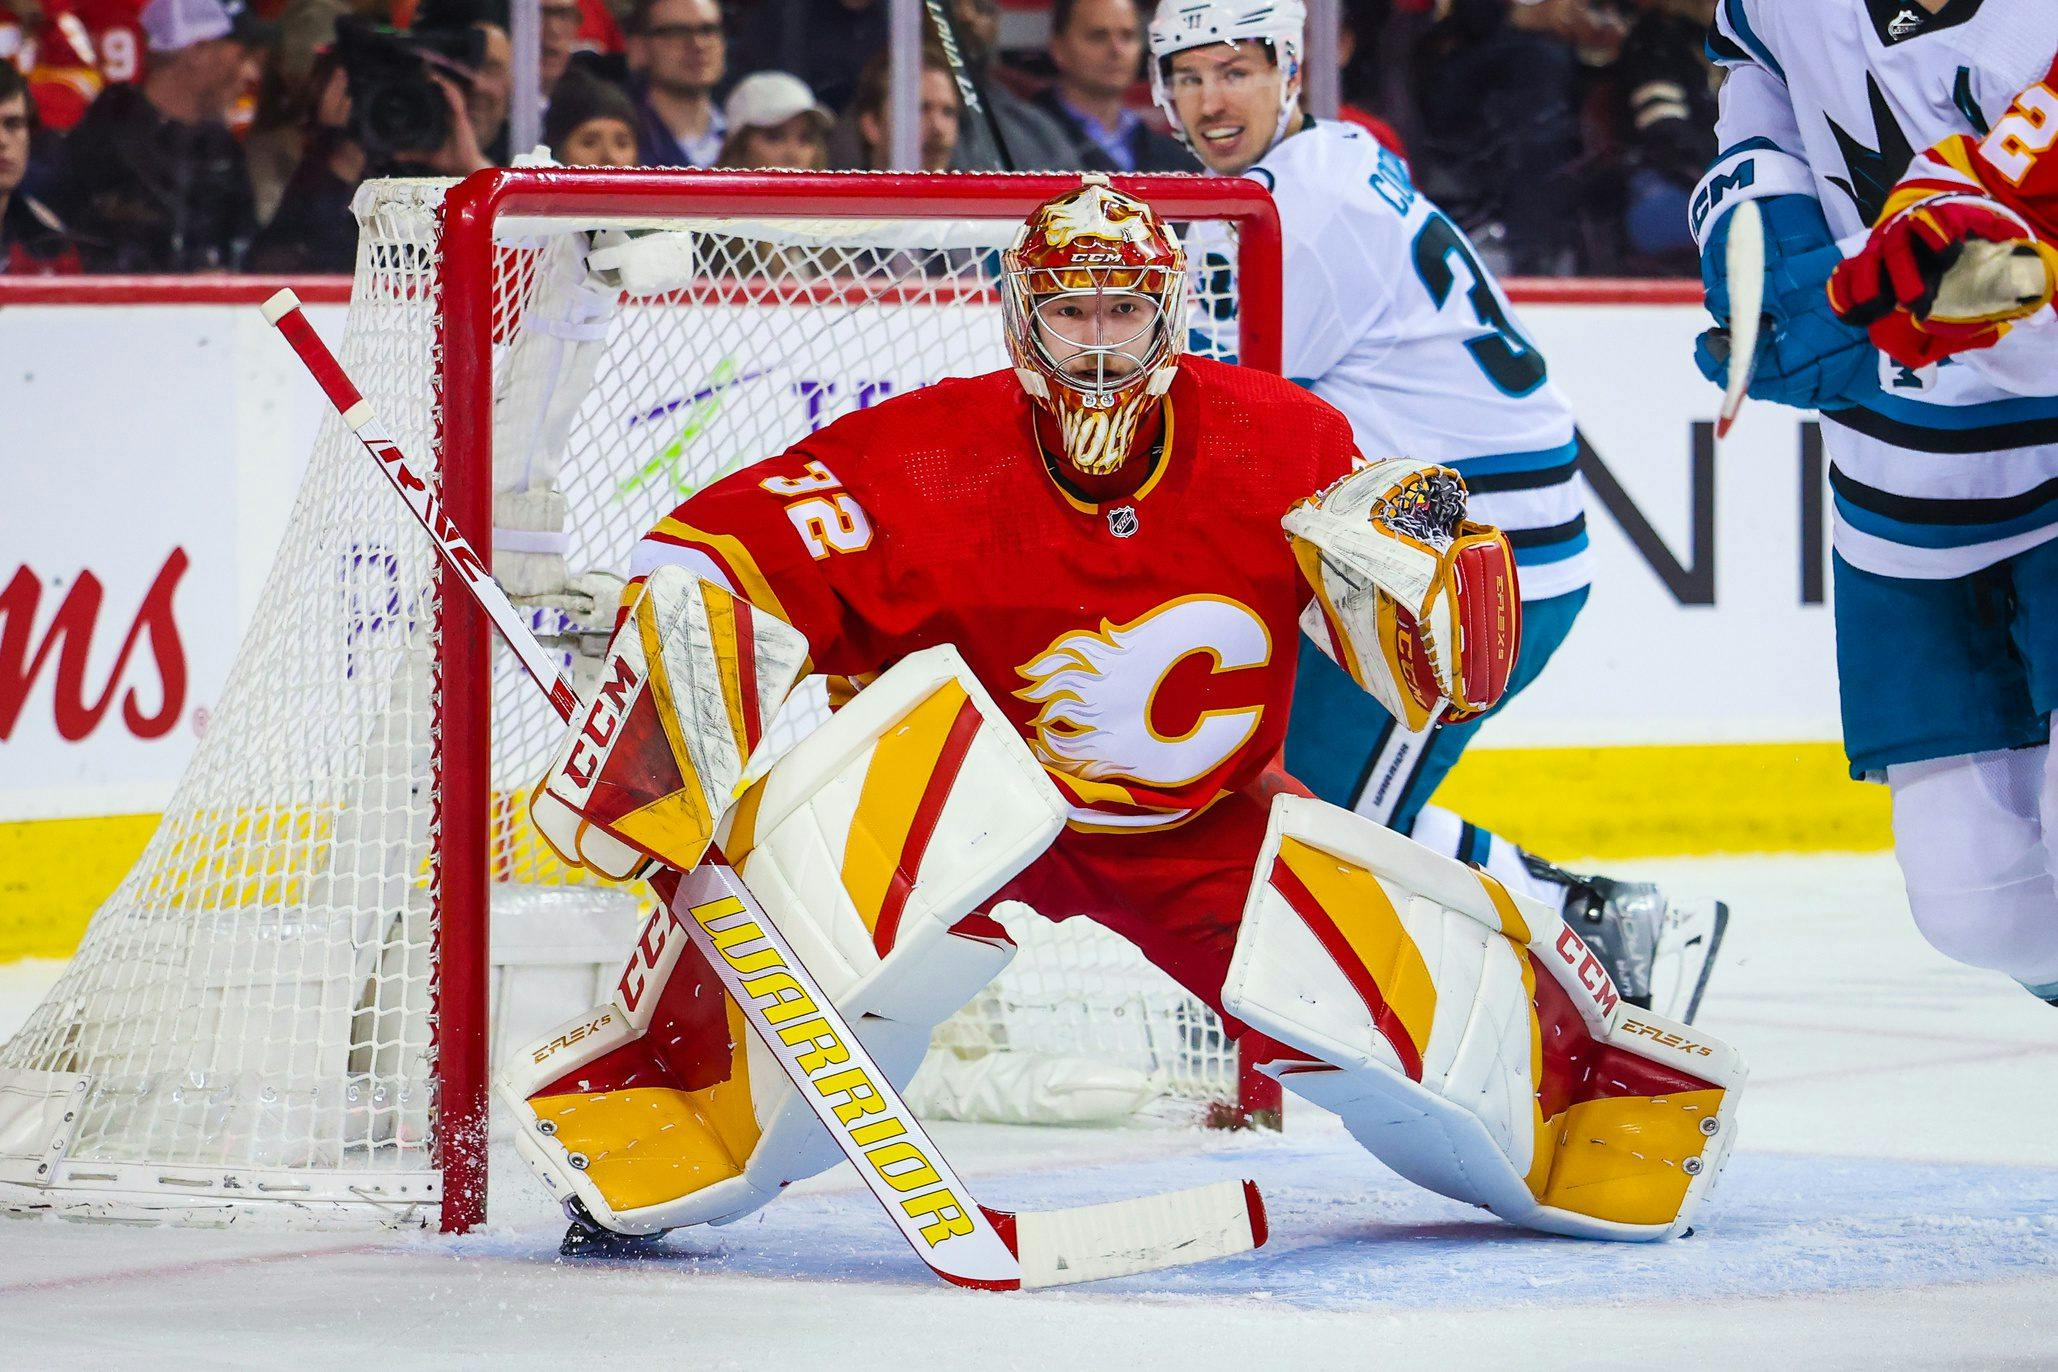 The Calgary Flames may need to trade Dan Vladar to make room for Dustin Wolf